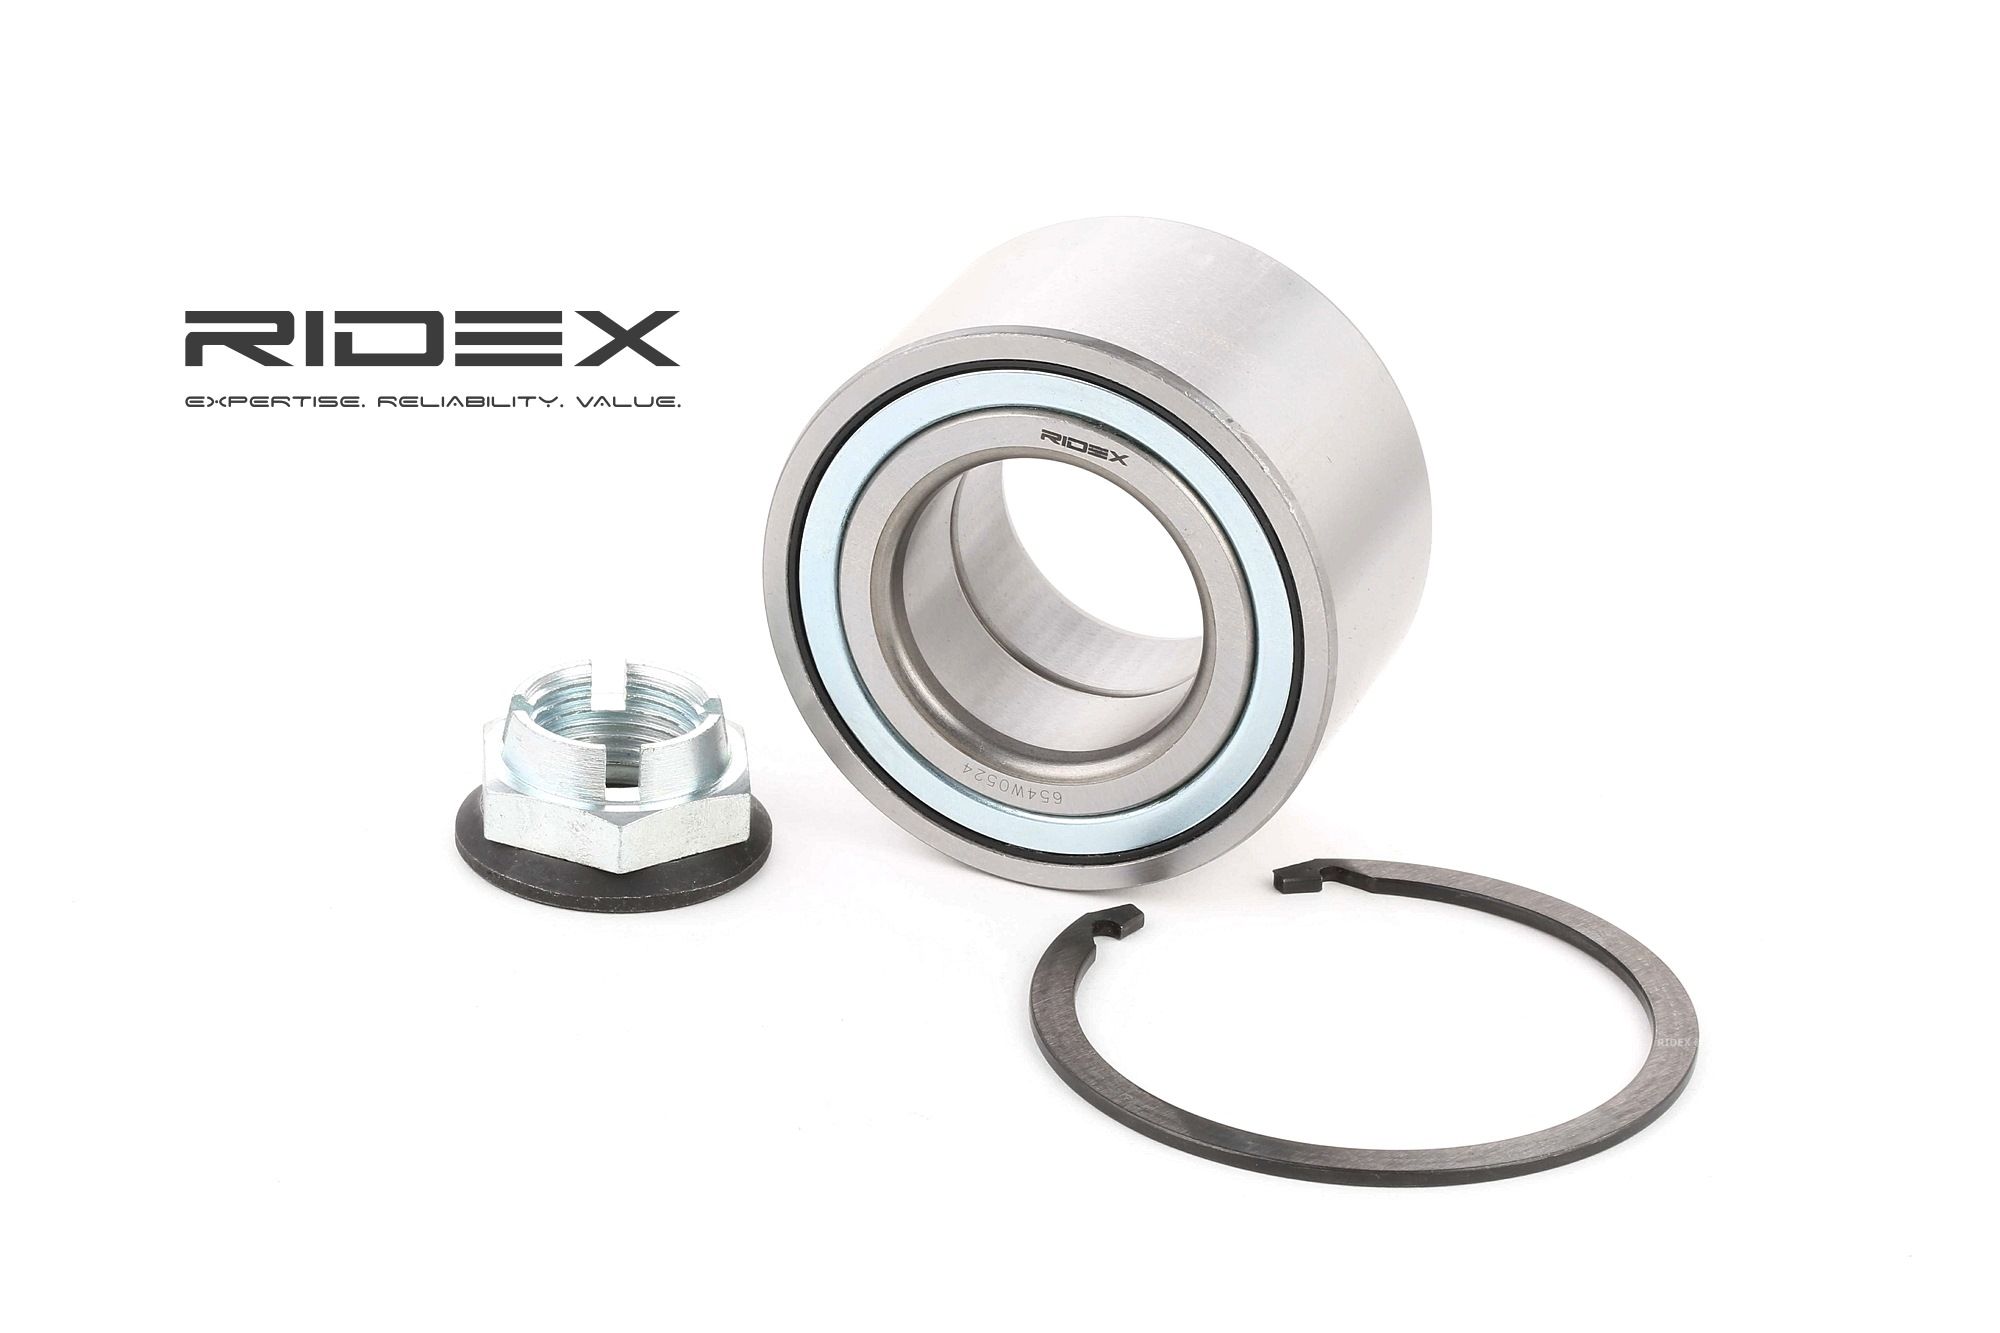 RIDEX 654W0524 Wheel bearing kit Front axle both sides, Rear Axle both sides, 80,00 mm